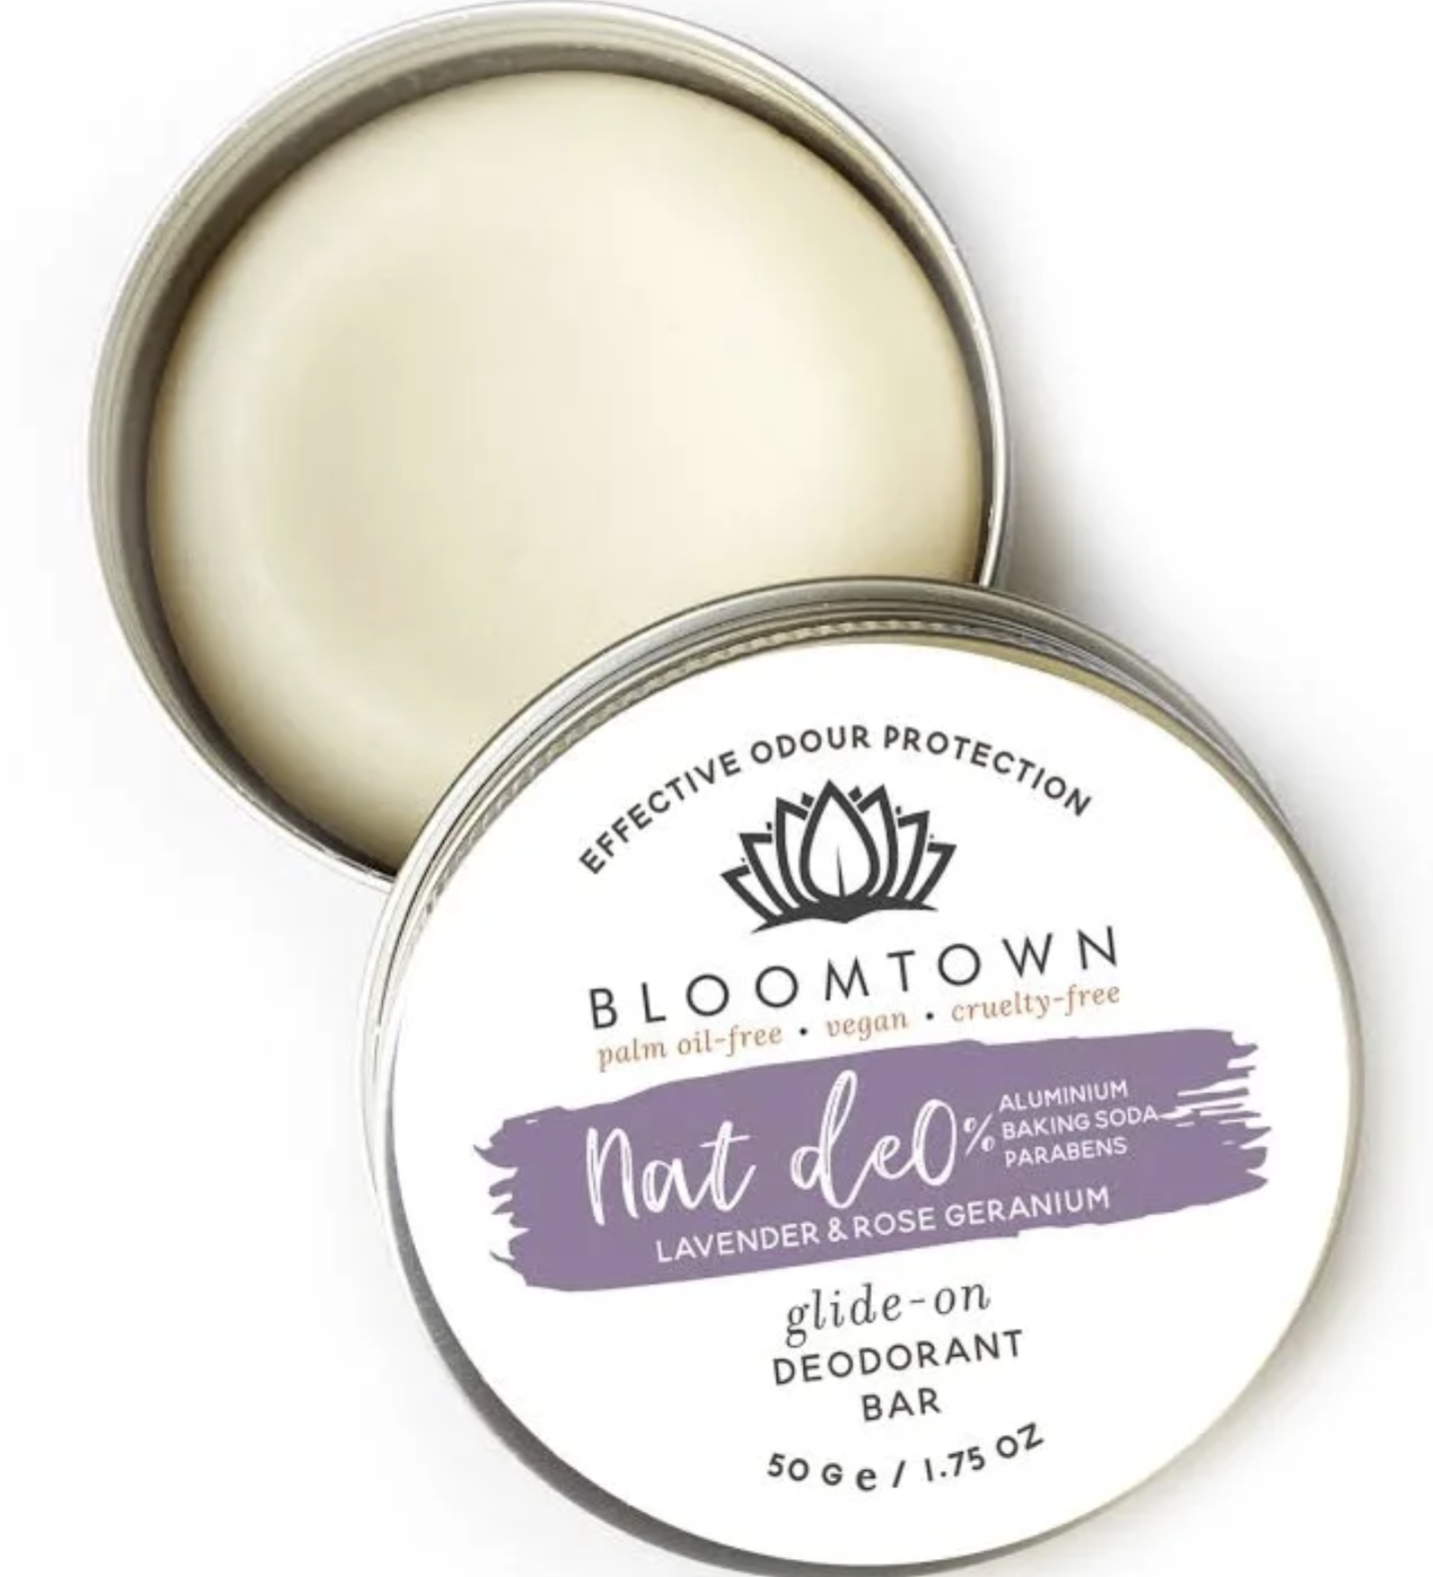 Natural Deodorant from Bloomtown